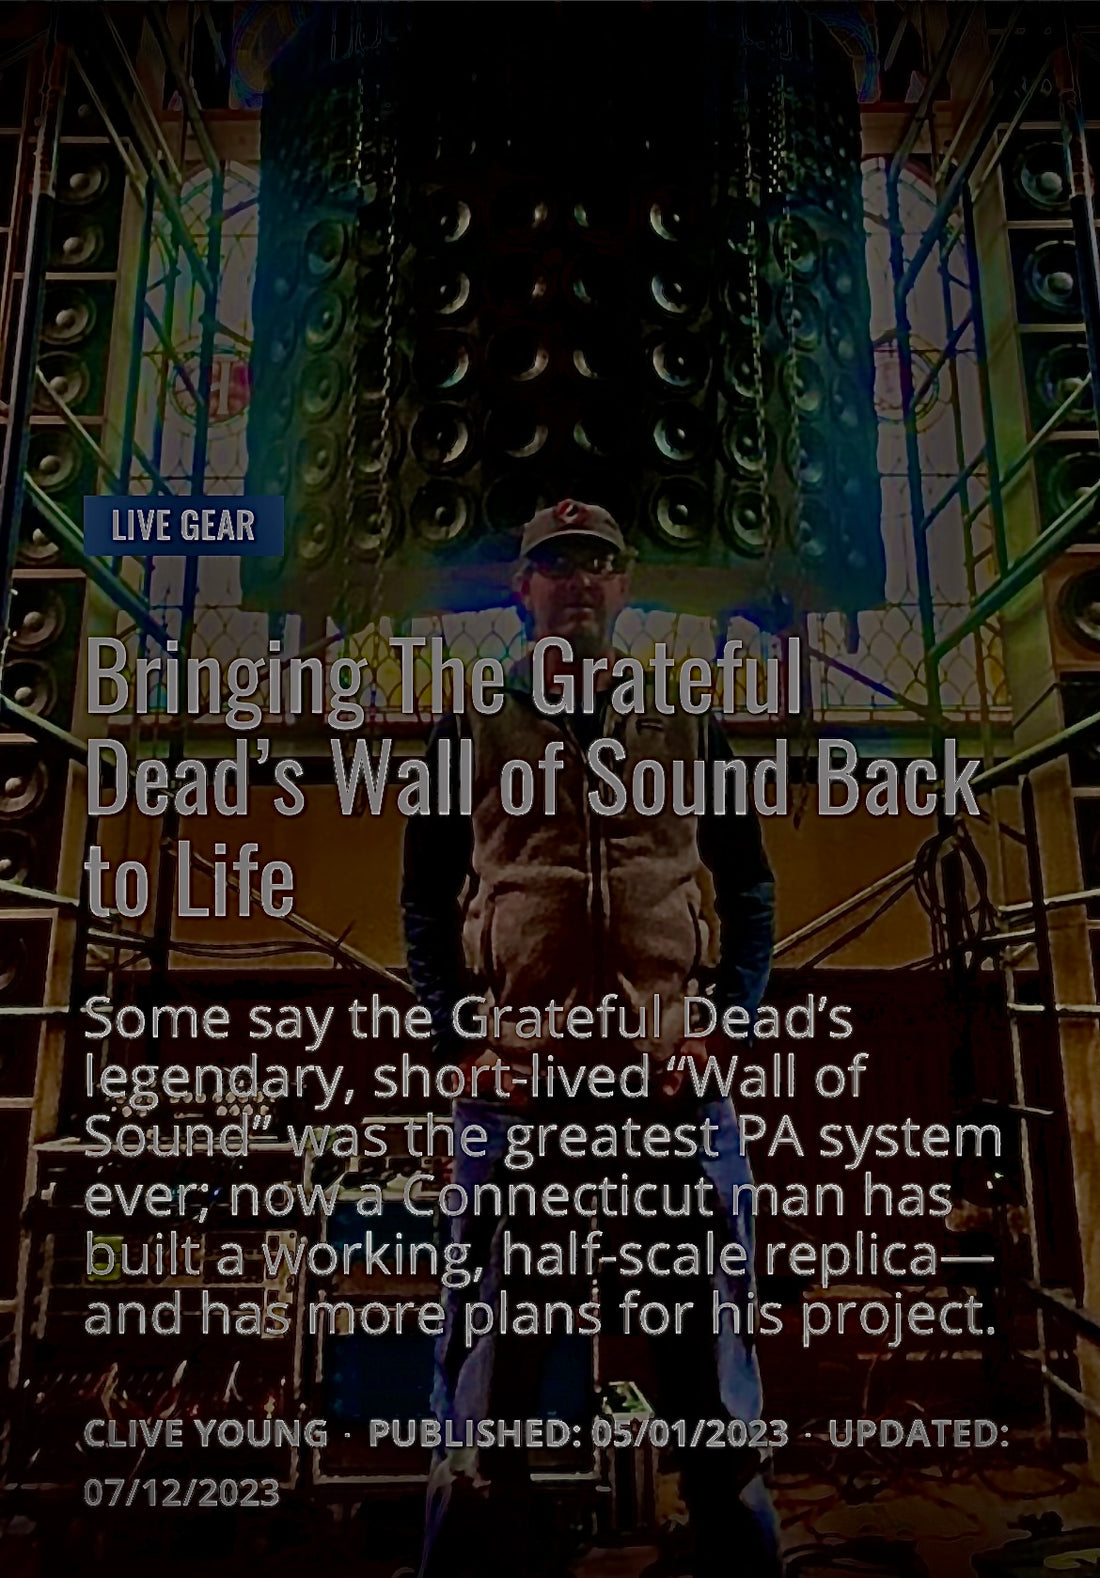 Bringing the Grateful Dead’s Wall of Sound Back to Life